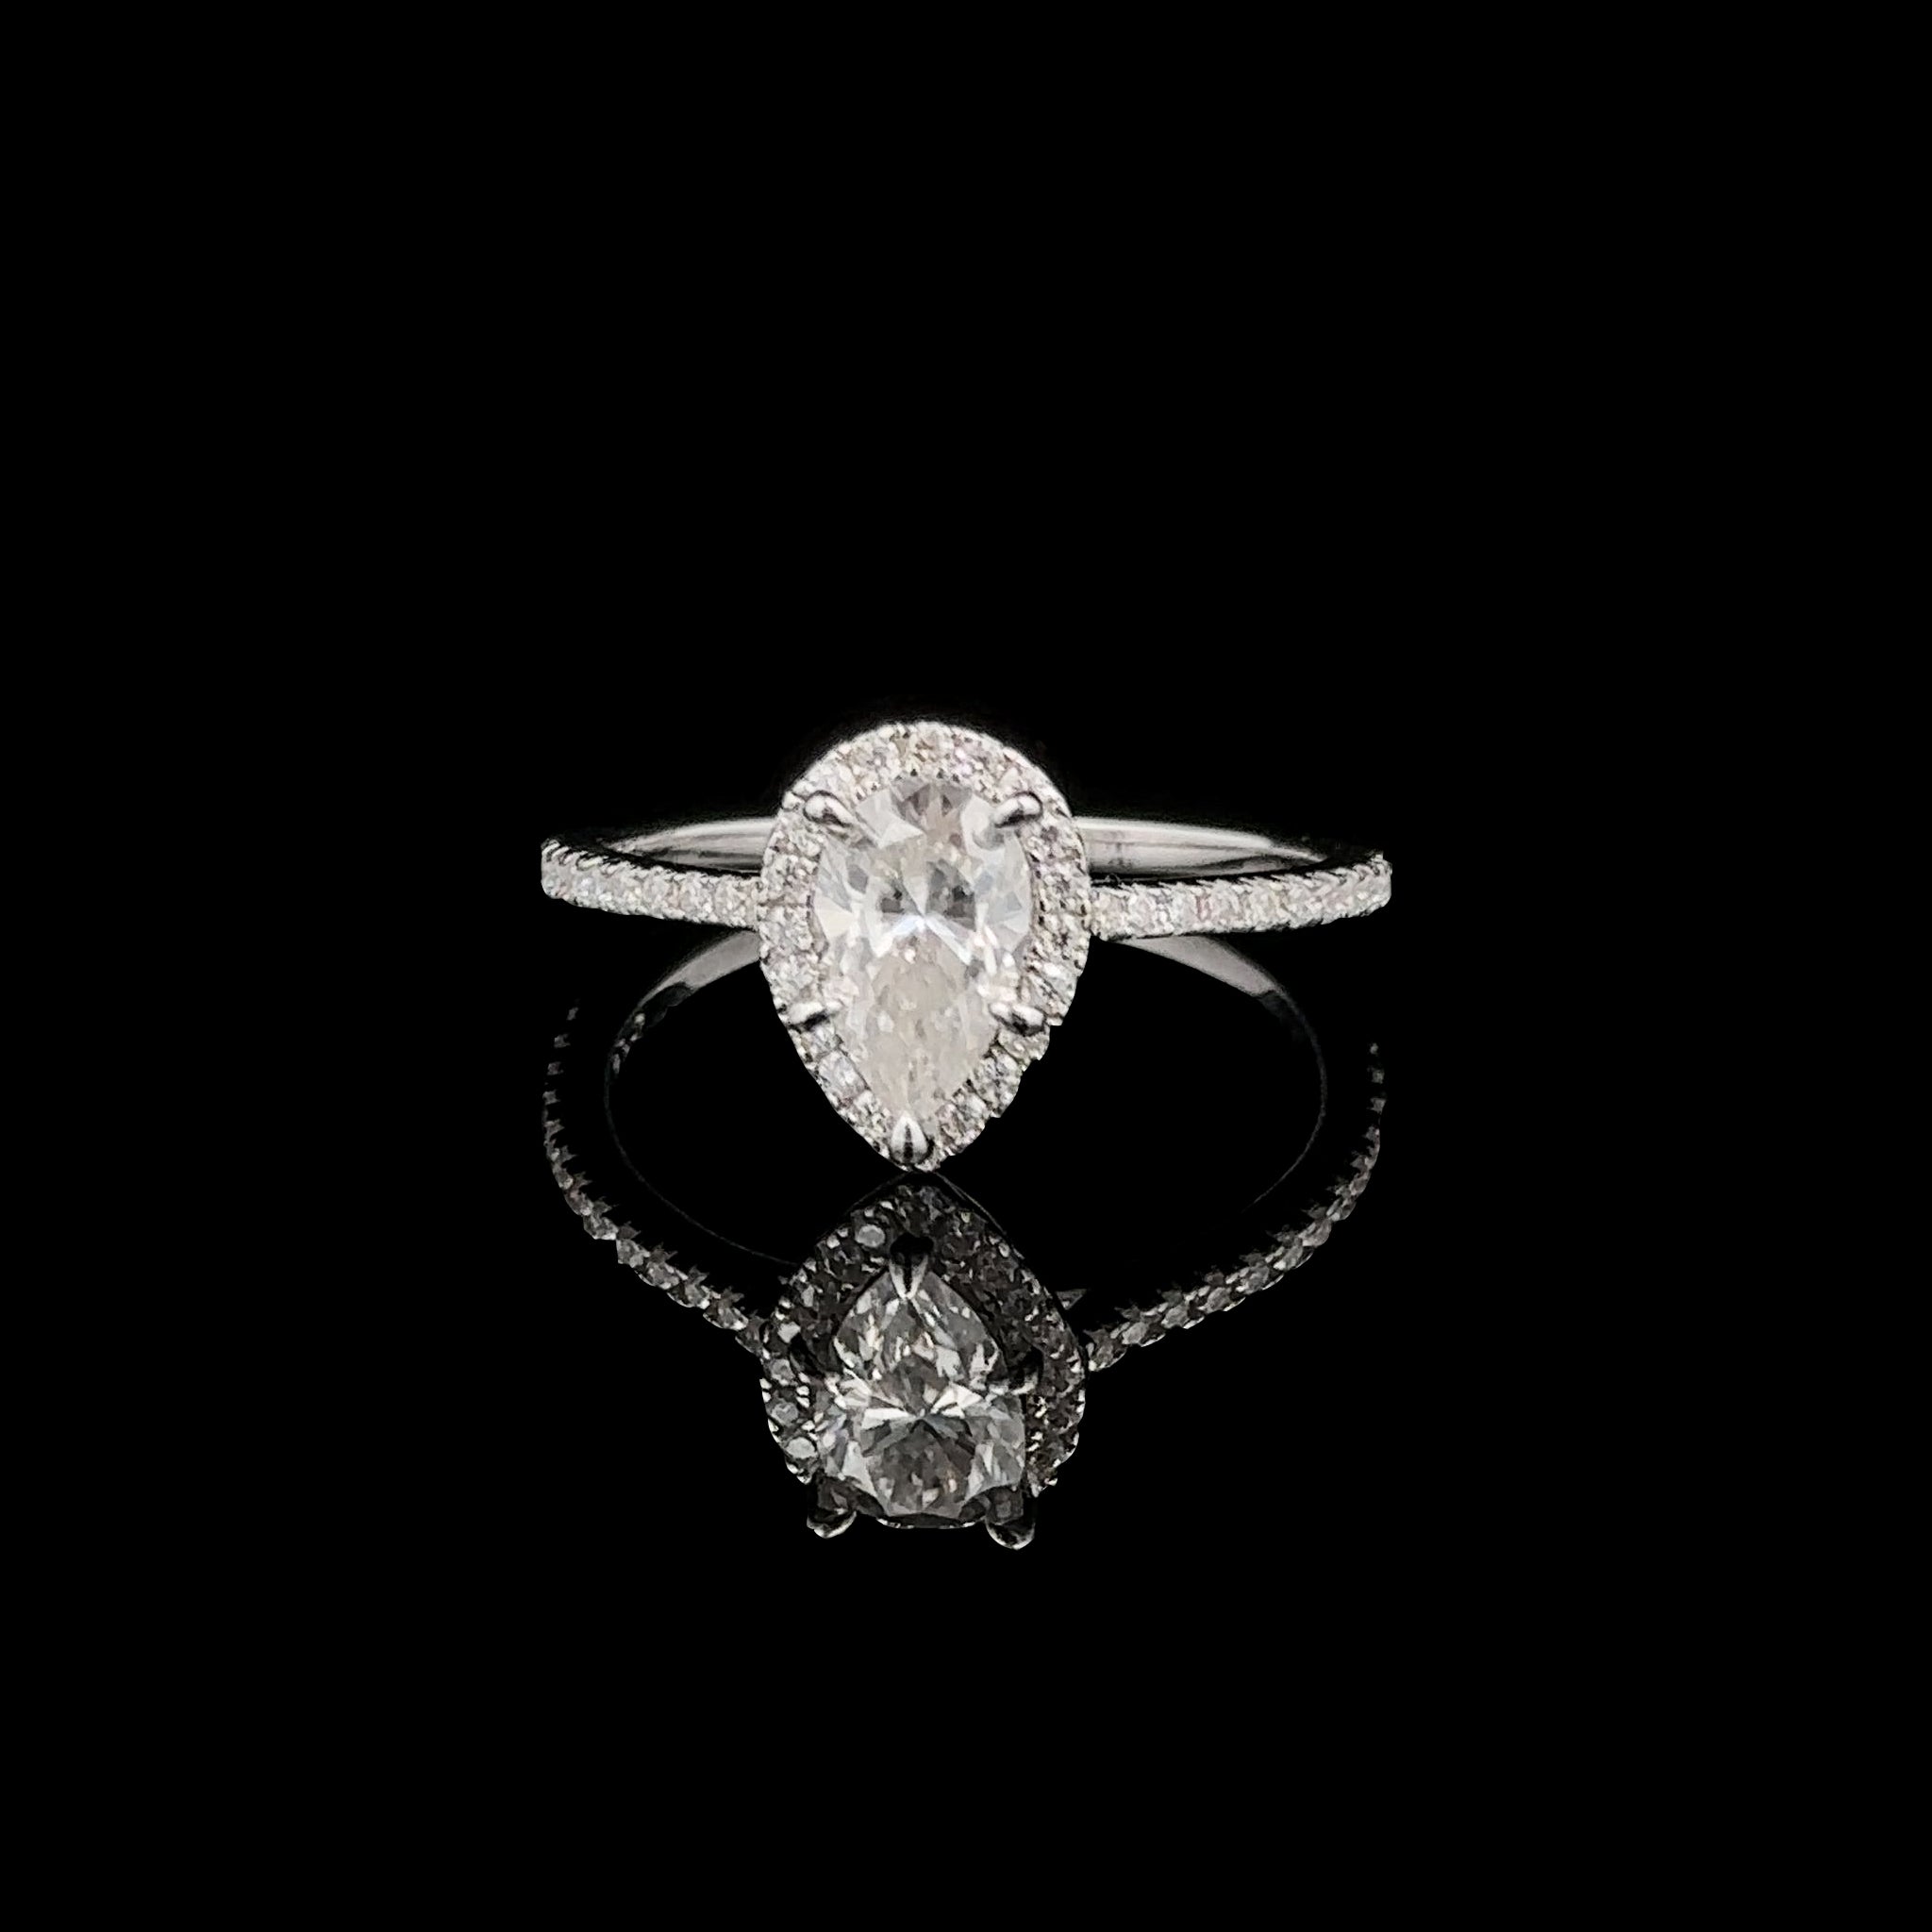 PEARLY 1.28CTW 925 SILVER VVS D MOISSANITE RING | 995141